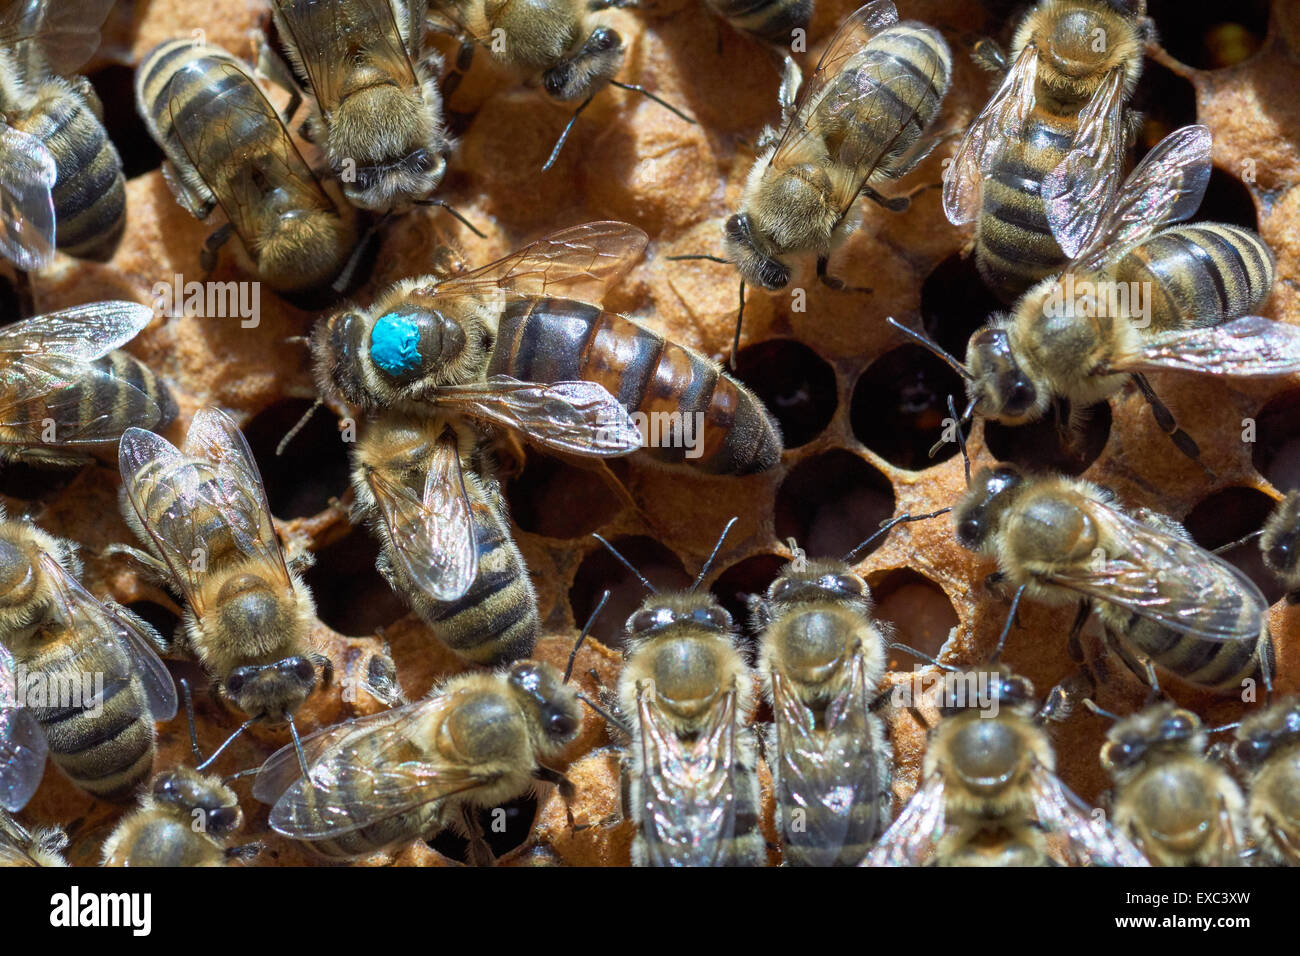 Queen bee in the center. It's larger than other worker bees and it's marked by blue paint Stock Photo